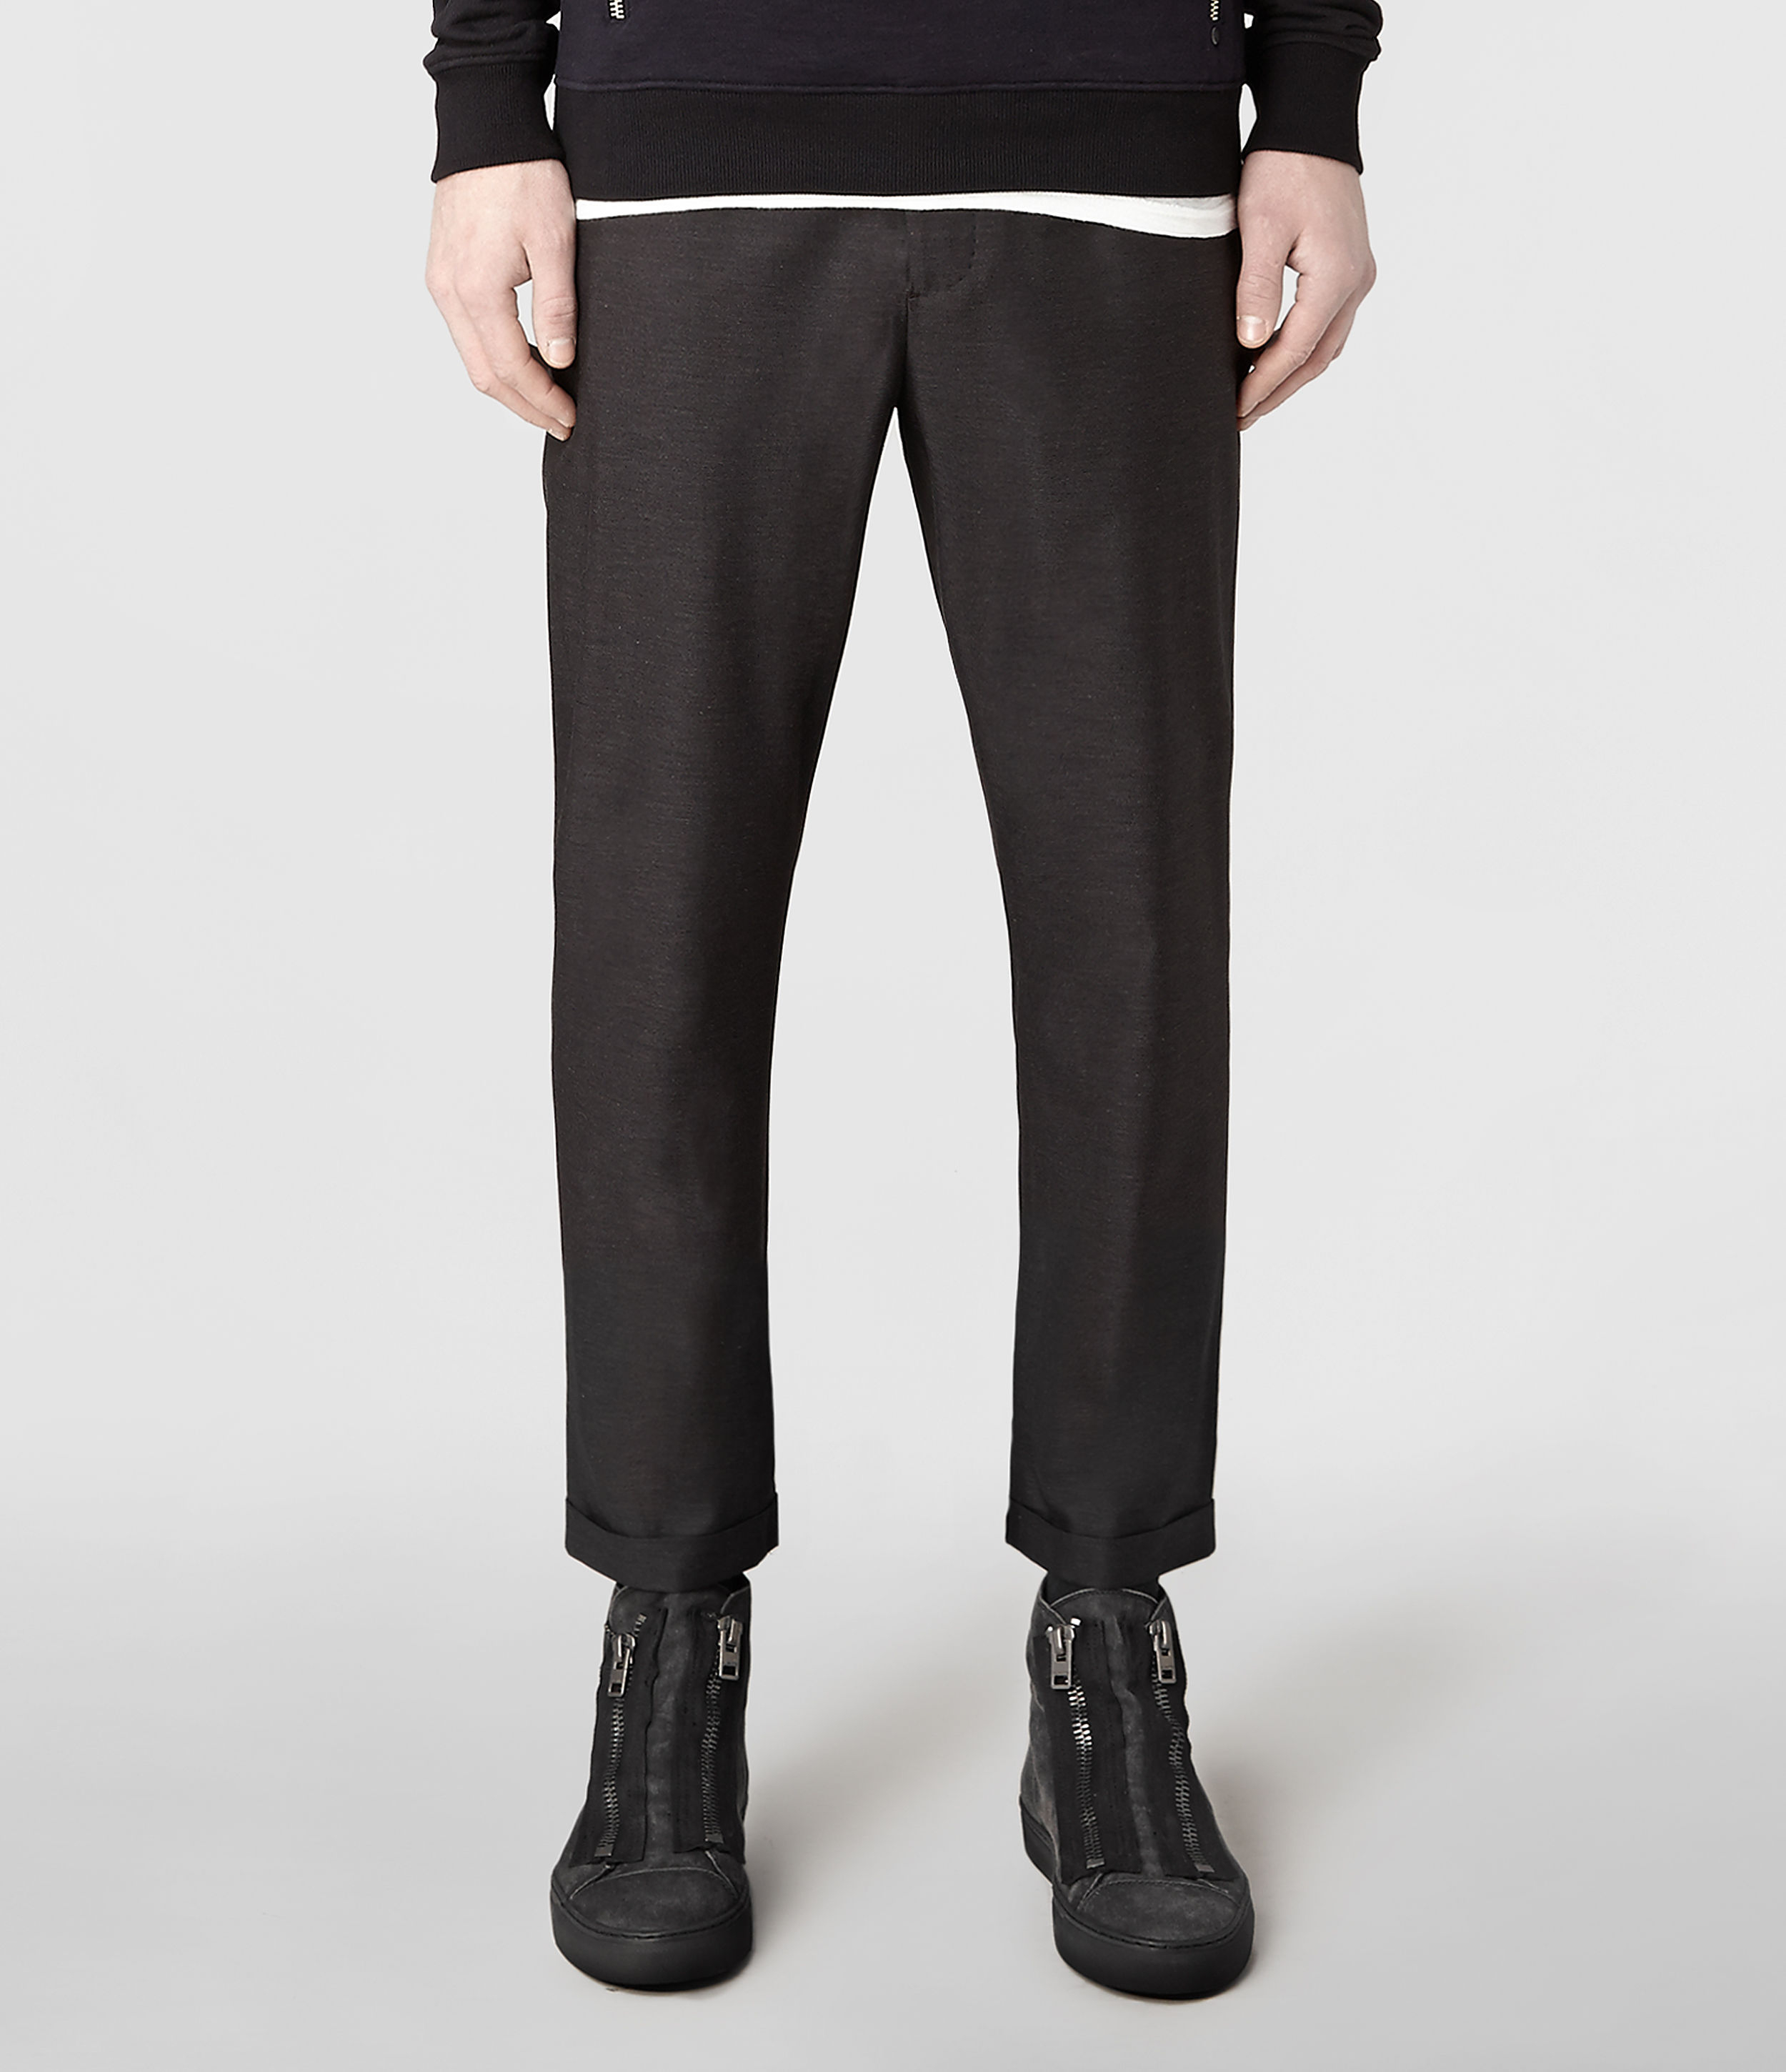 AllSaints Nile Pant in Charcoal (Gray) for Men - Lyst